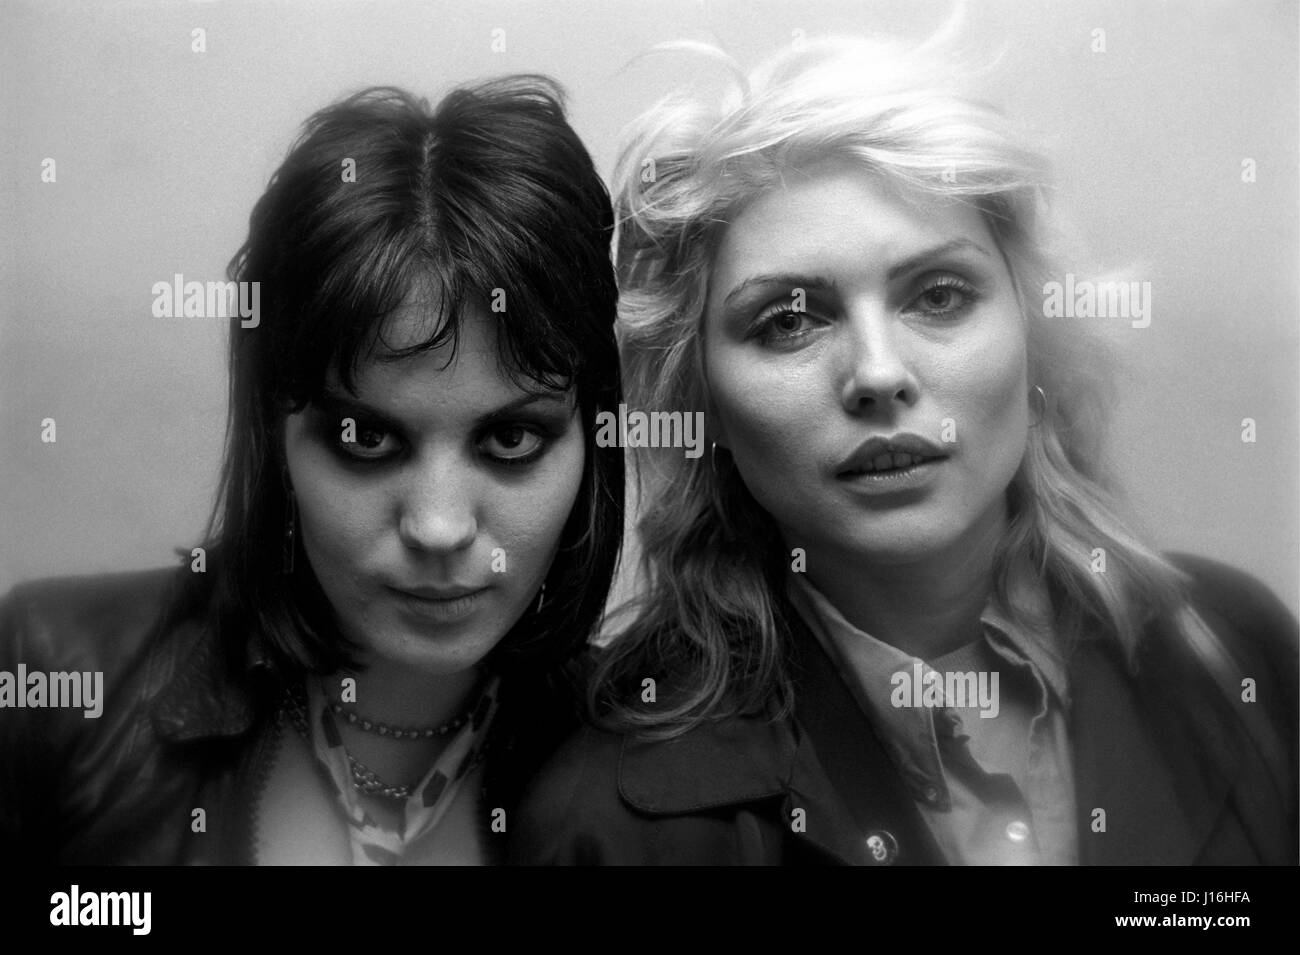 Joan Jett of The Runaways and Debbie Harry of Blondie backstage at the Tower Theatre in Philadelphia, PA at a gig featuring The Runaways, The Jam, and The Ramones. March 18, 1978. © mpi09 / MediaPunch Stock Photo